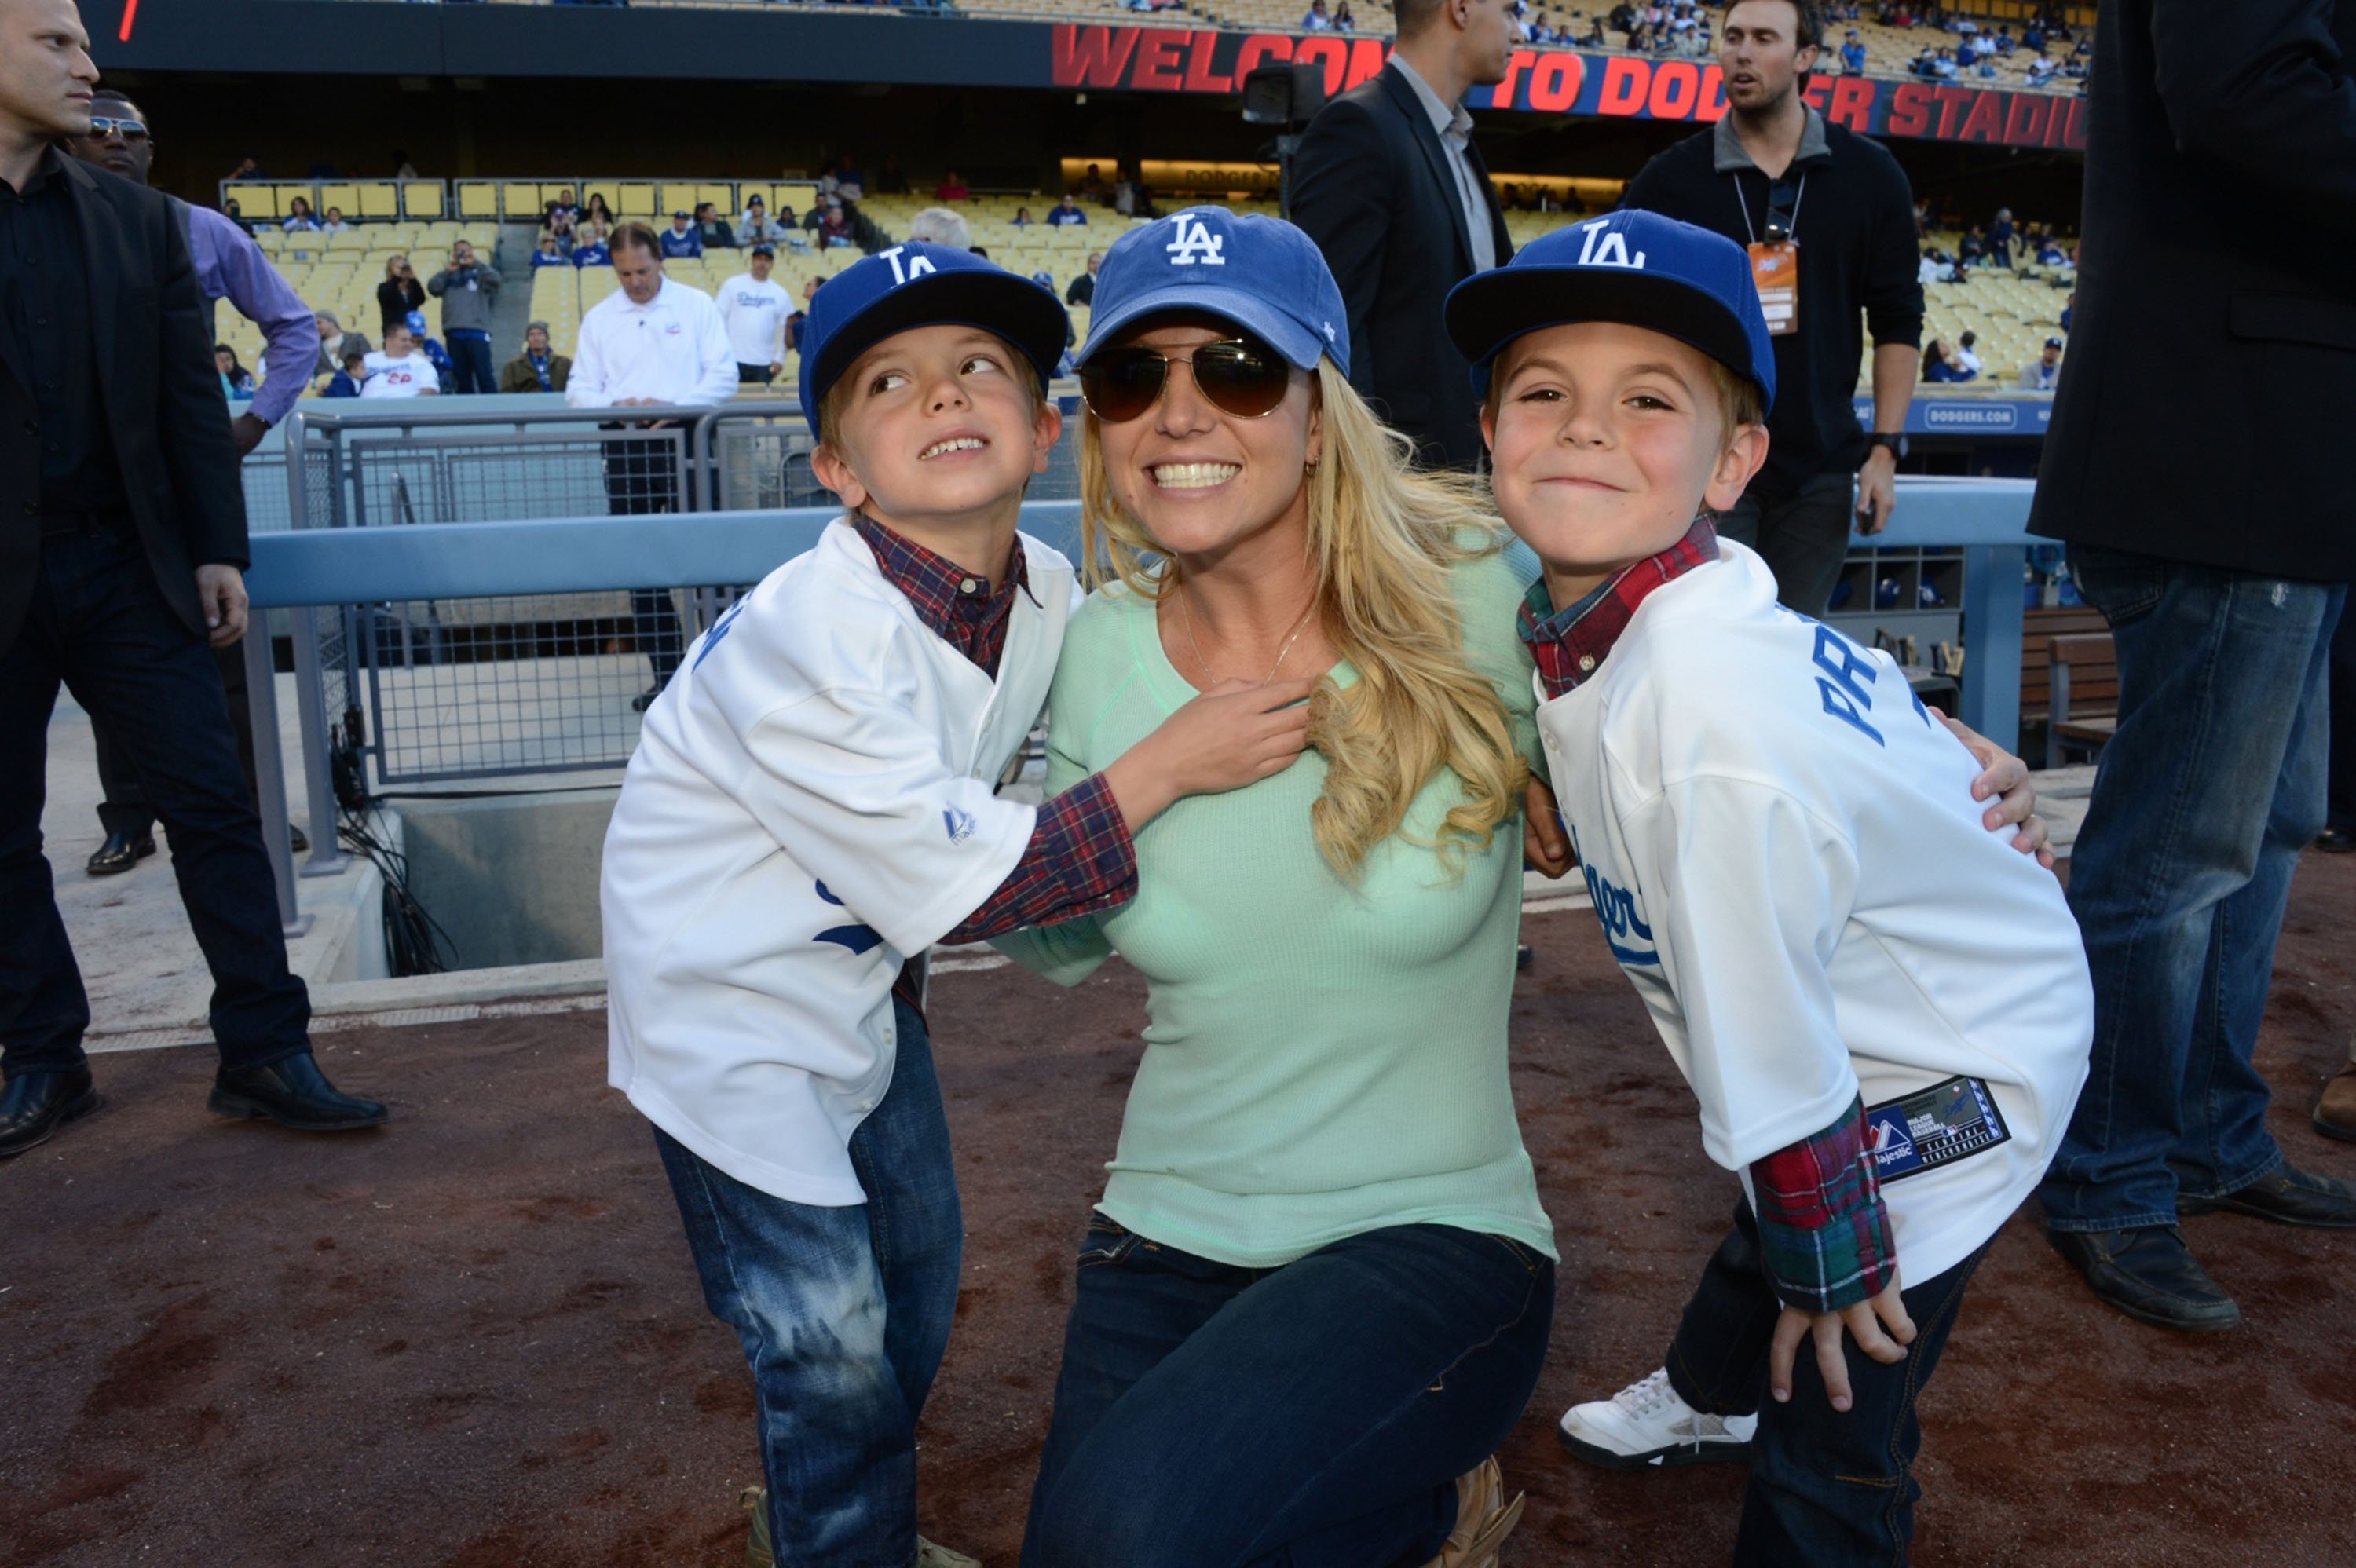 Britney Spears poses with sons Jayden James Federline and Sean Preston Federline during a game against the San Diego Padres at Dodger Stadium on April 17, 2013, in Los Angeles, California. | Source: Getty Images